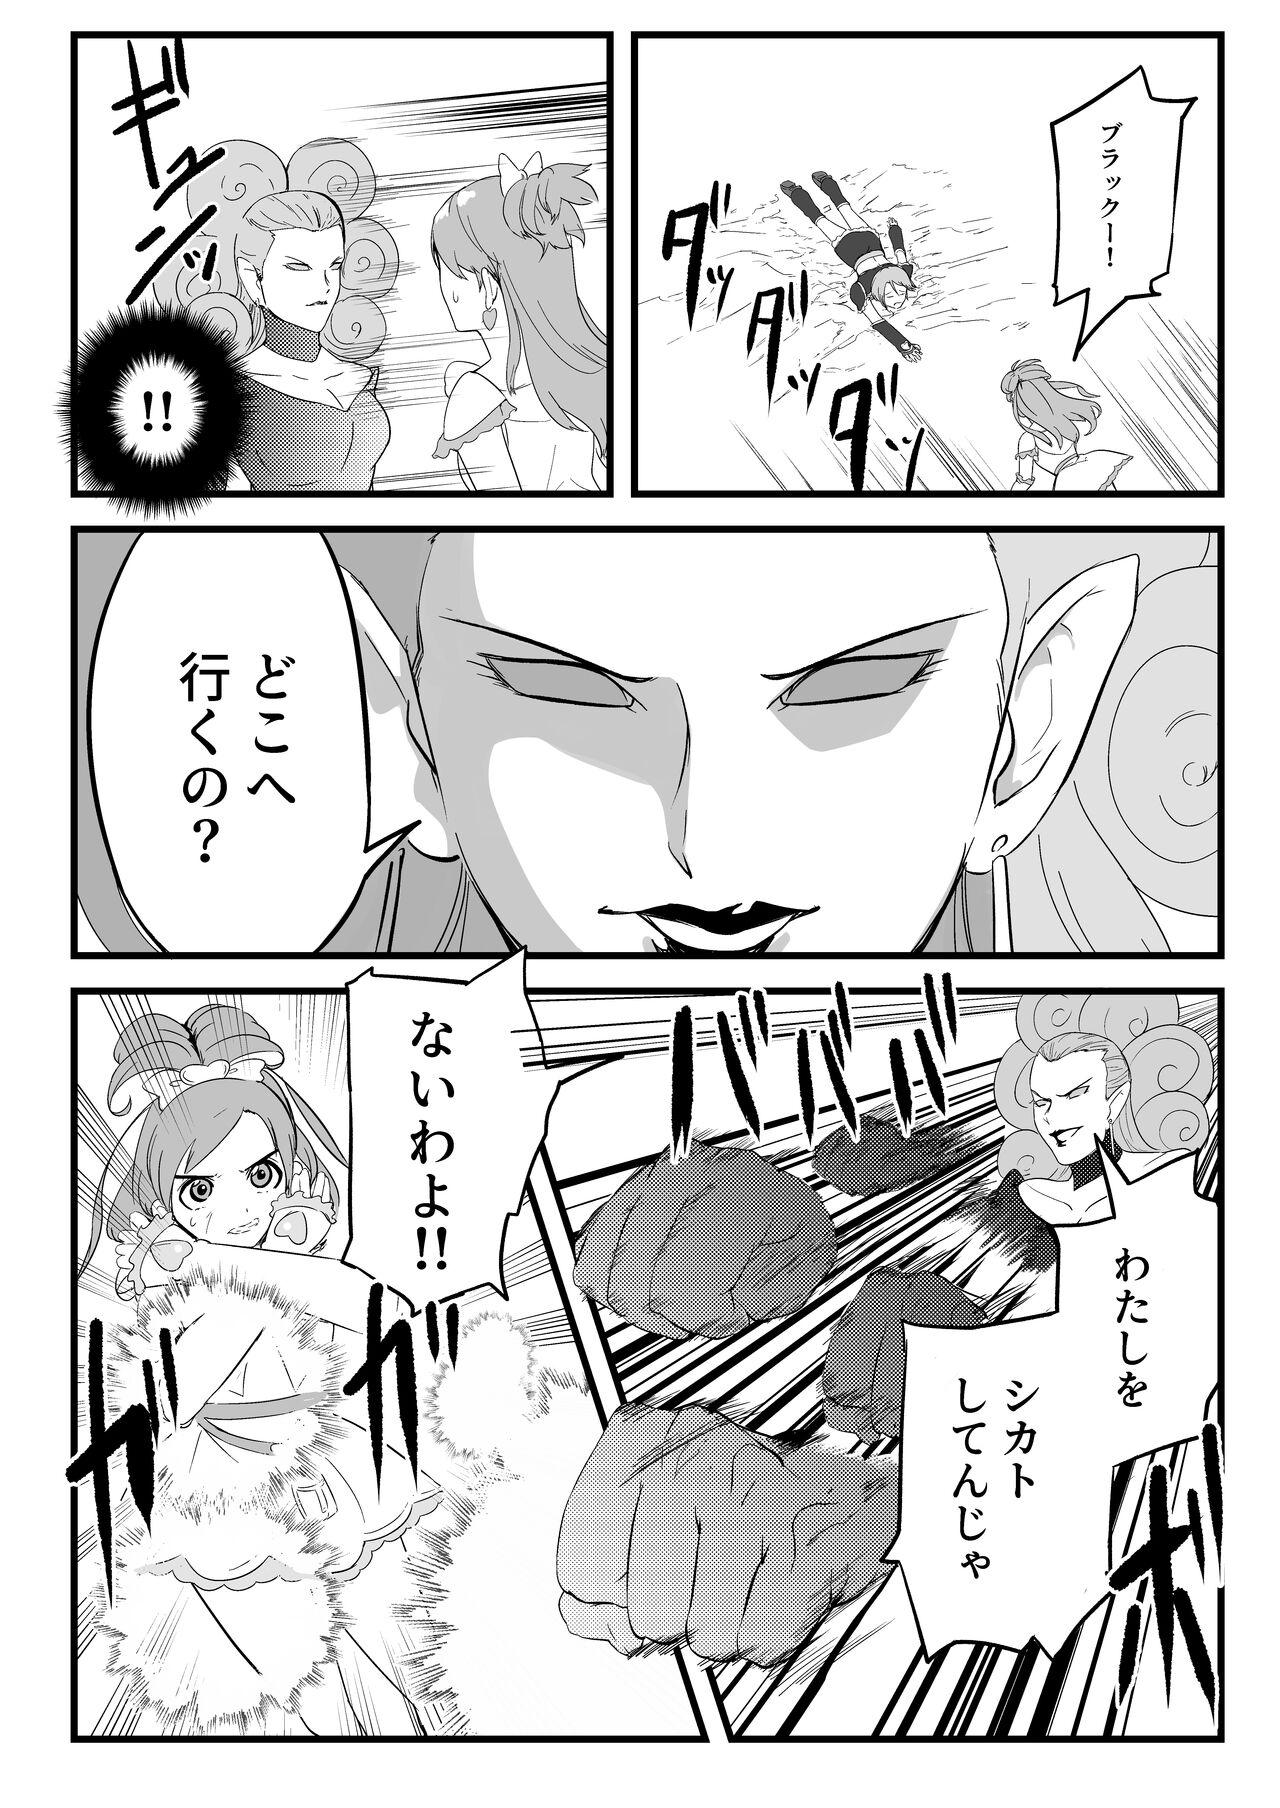 Magrinha Belly Crisis 7 - Pretty cure Pack - Page 5